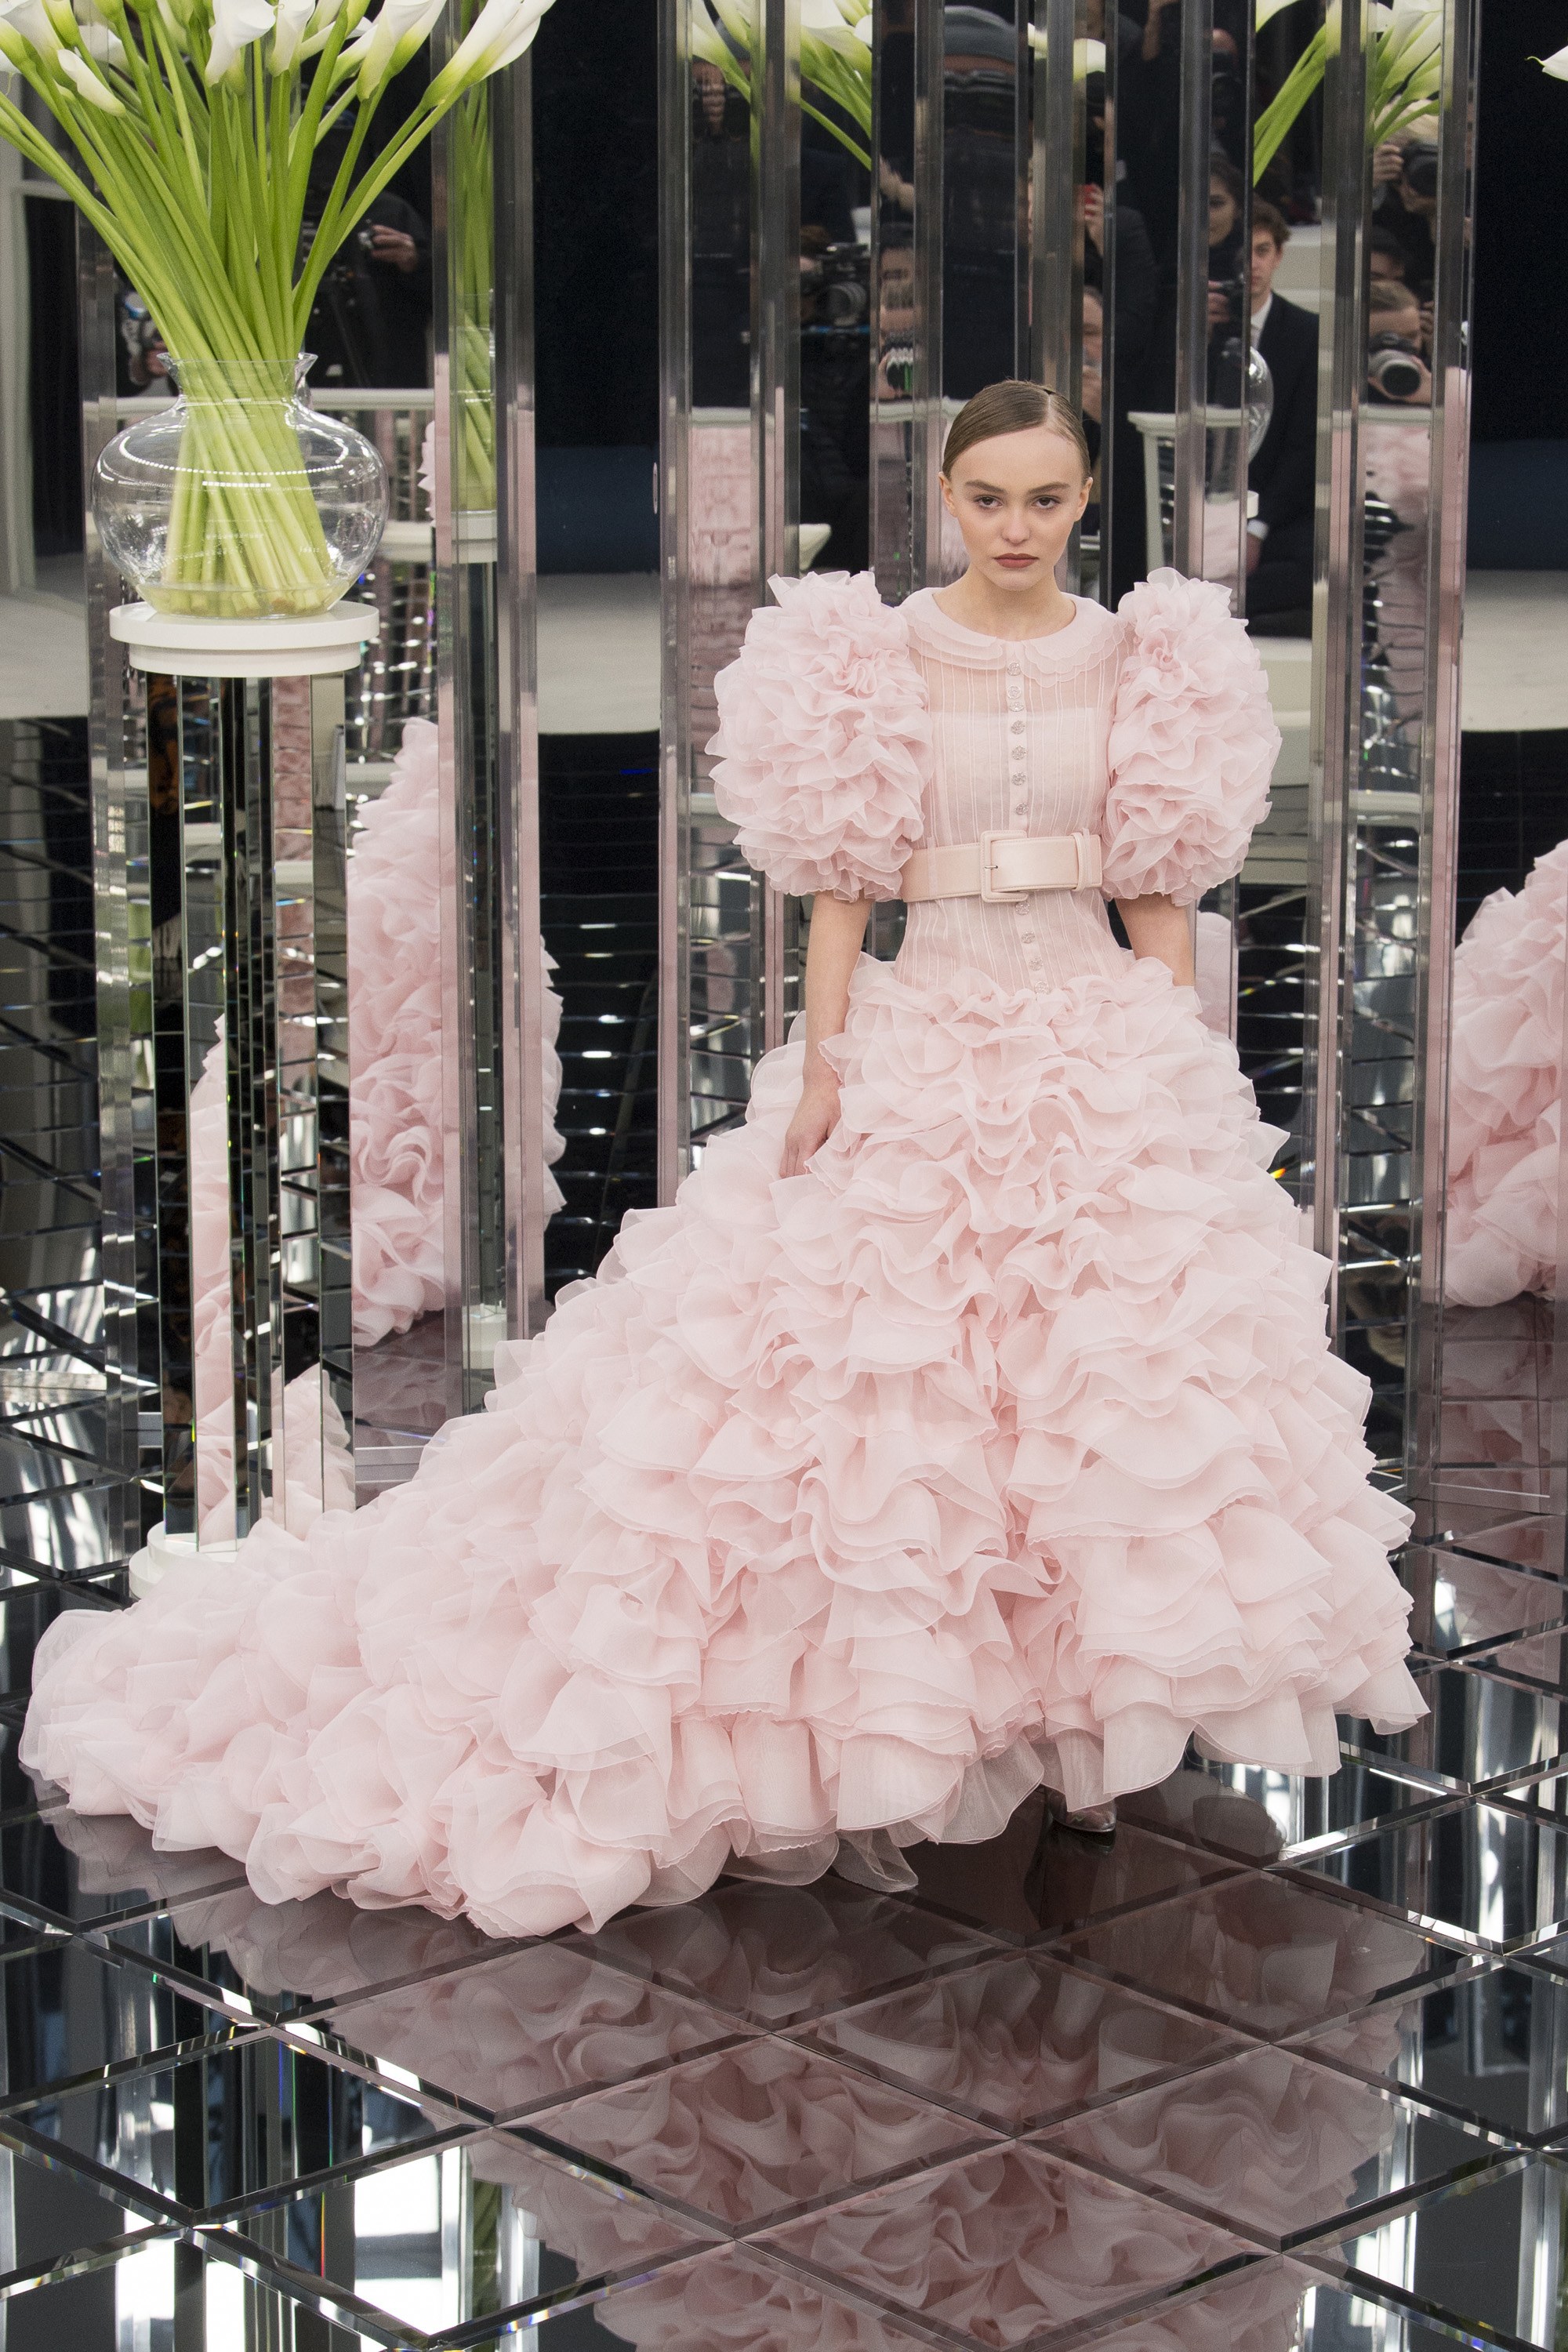 BACKSTAGE CHANEL SPRING 2015 HAUTE COUTURE SHOW